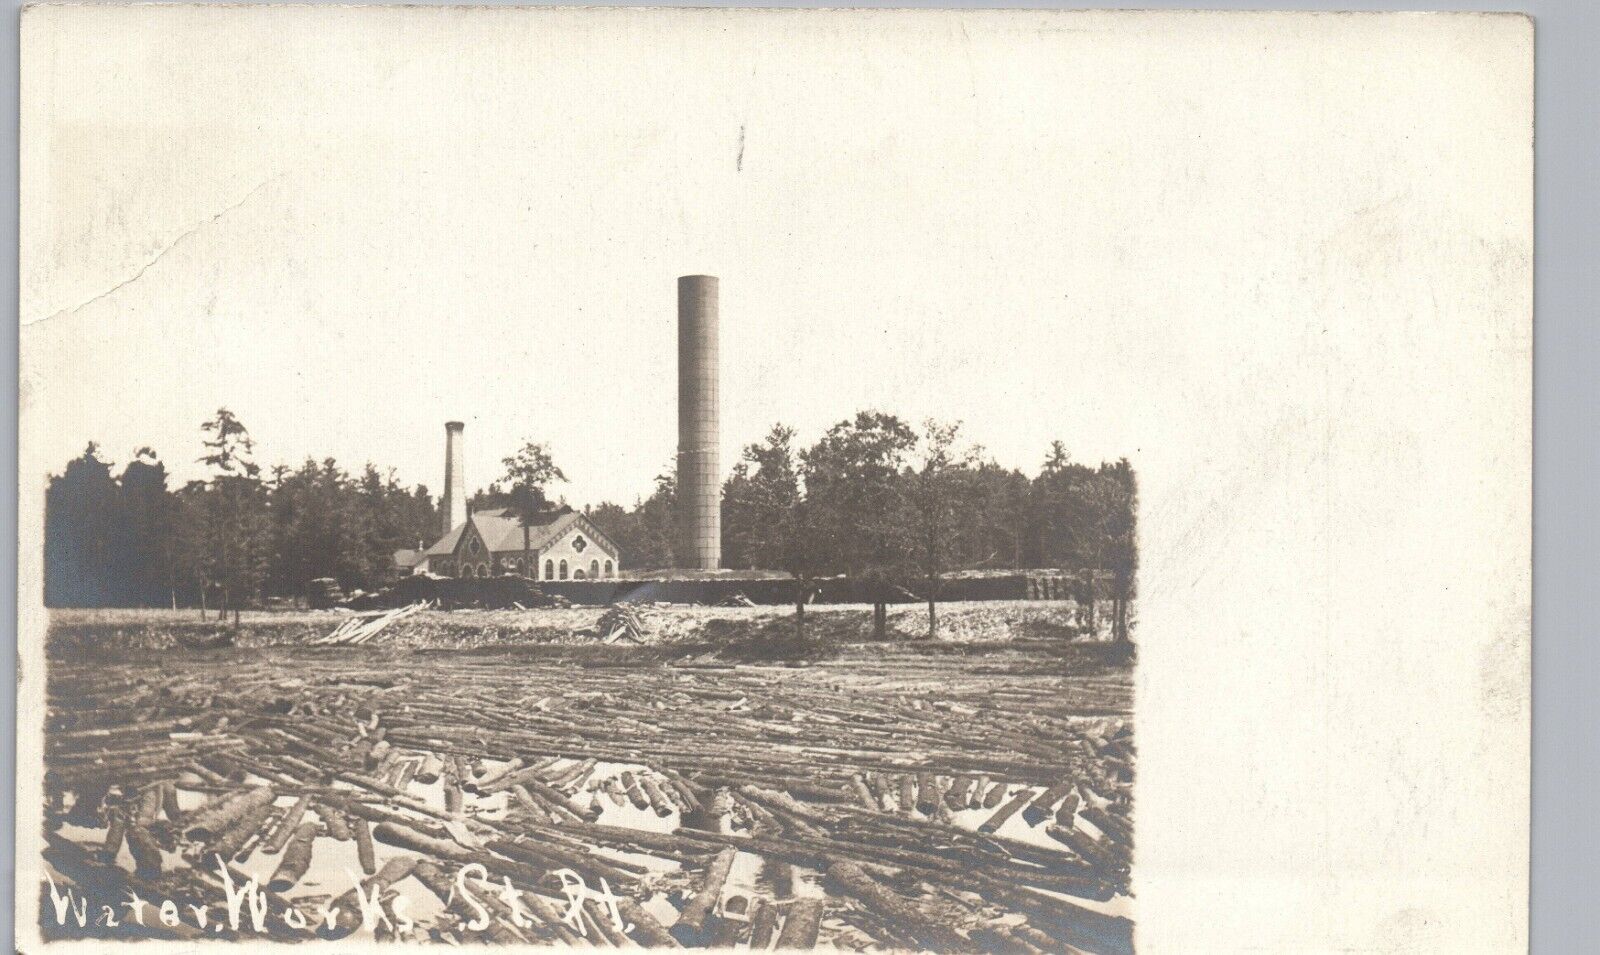 WATER WORKS stevens point wisconsin real photo postcard rppc wi logging antique